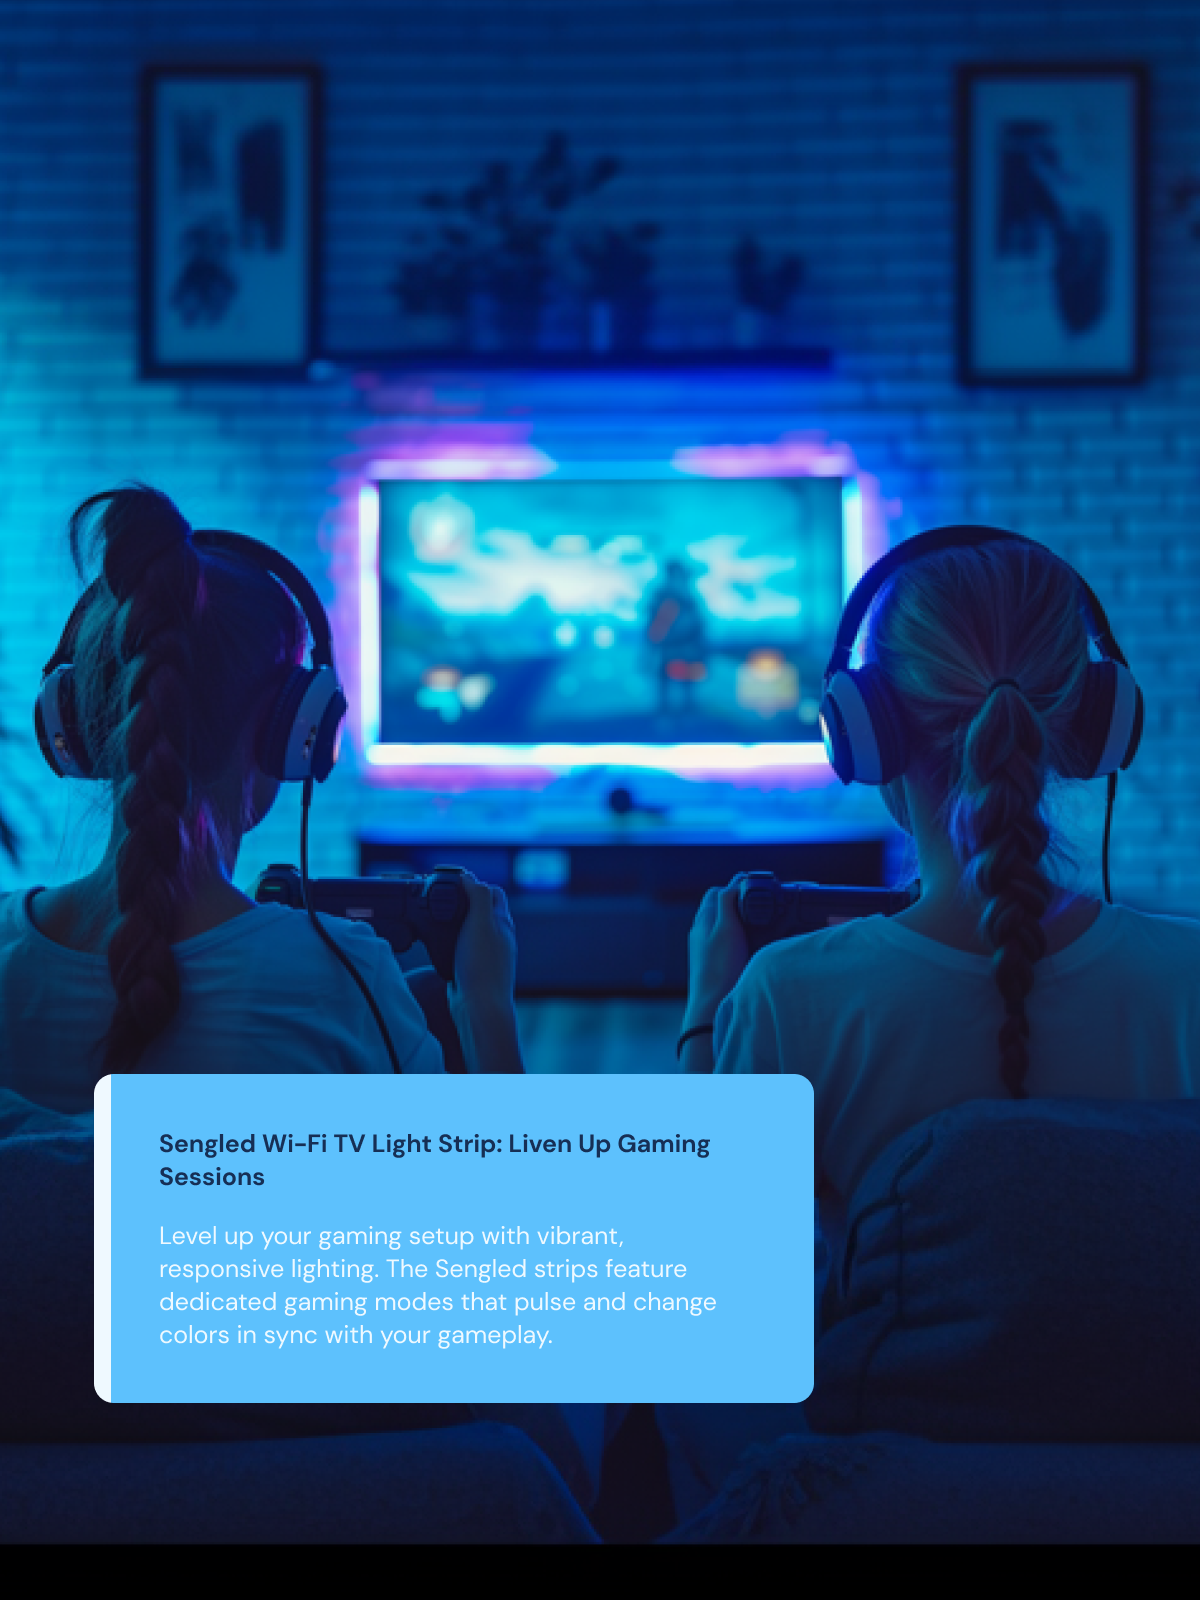 Liven Up Gaming Sessions Level up your gaming setup with vibrant, responsive lighting. The Sengled strips feature dedicated gaming modes that pulse and change colors in sync with your gameplay.